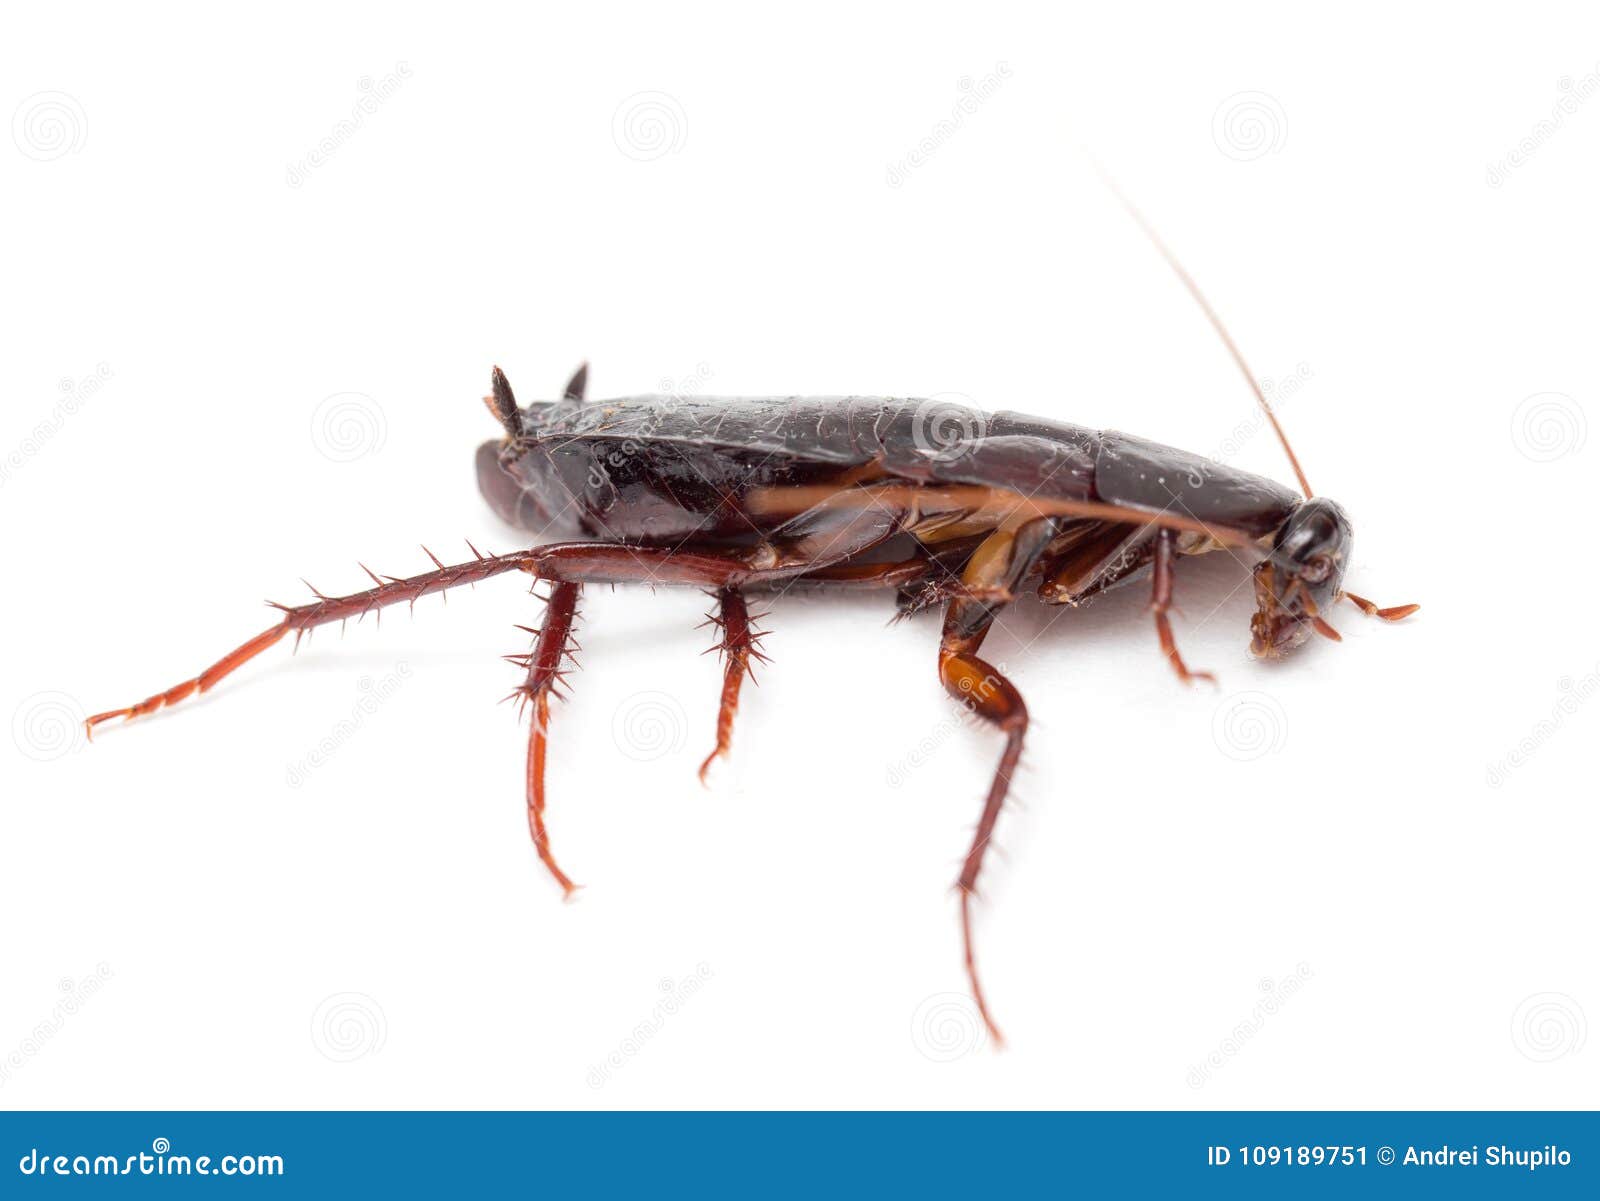 Cockroach on a White Background Stock Image - Image of horizontal ...